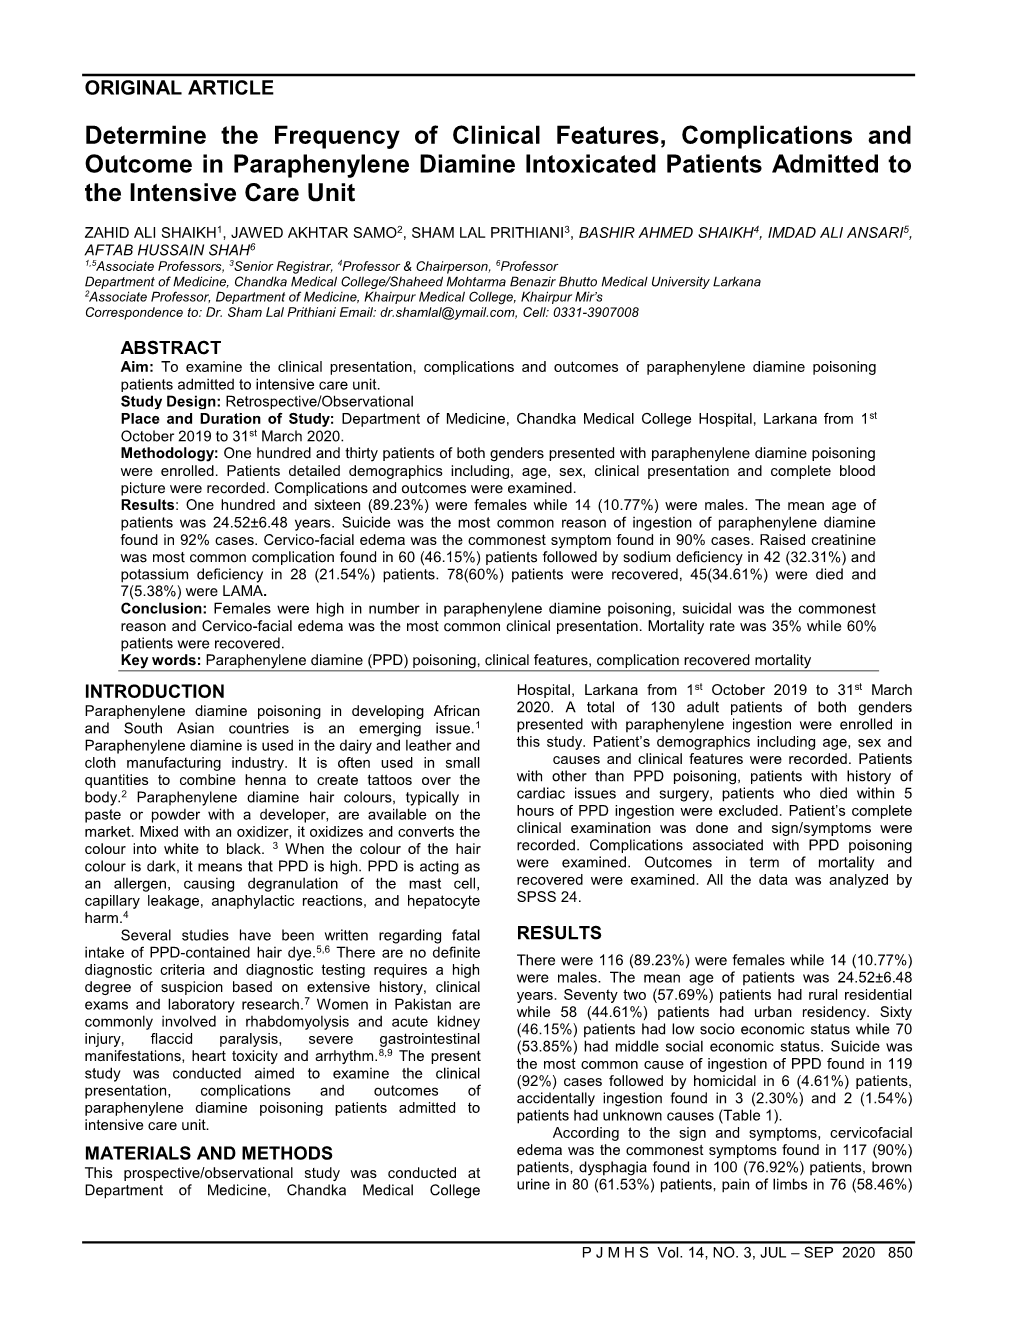 Determine the Frequency of Clinical Features, Complications and Outcome in Paraphenylene Diamine Intoxicated Patients Admitted to the Intensive Care Unit